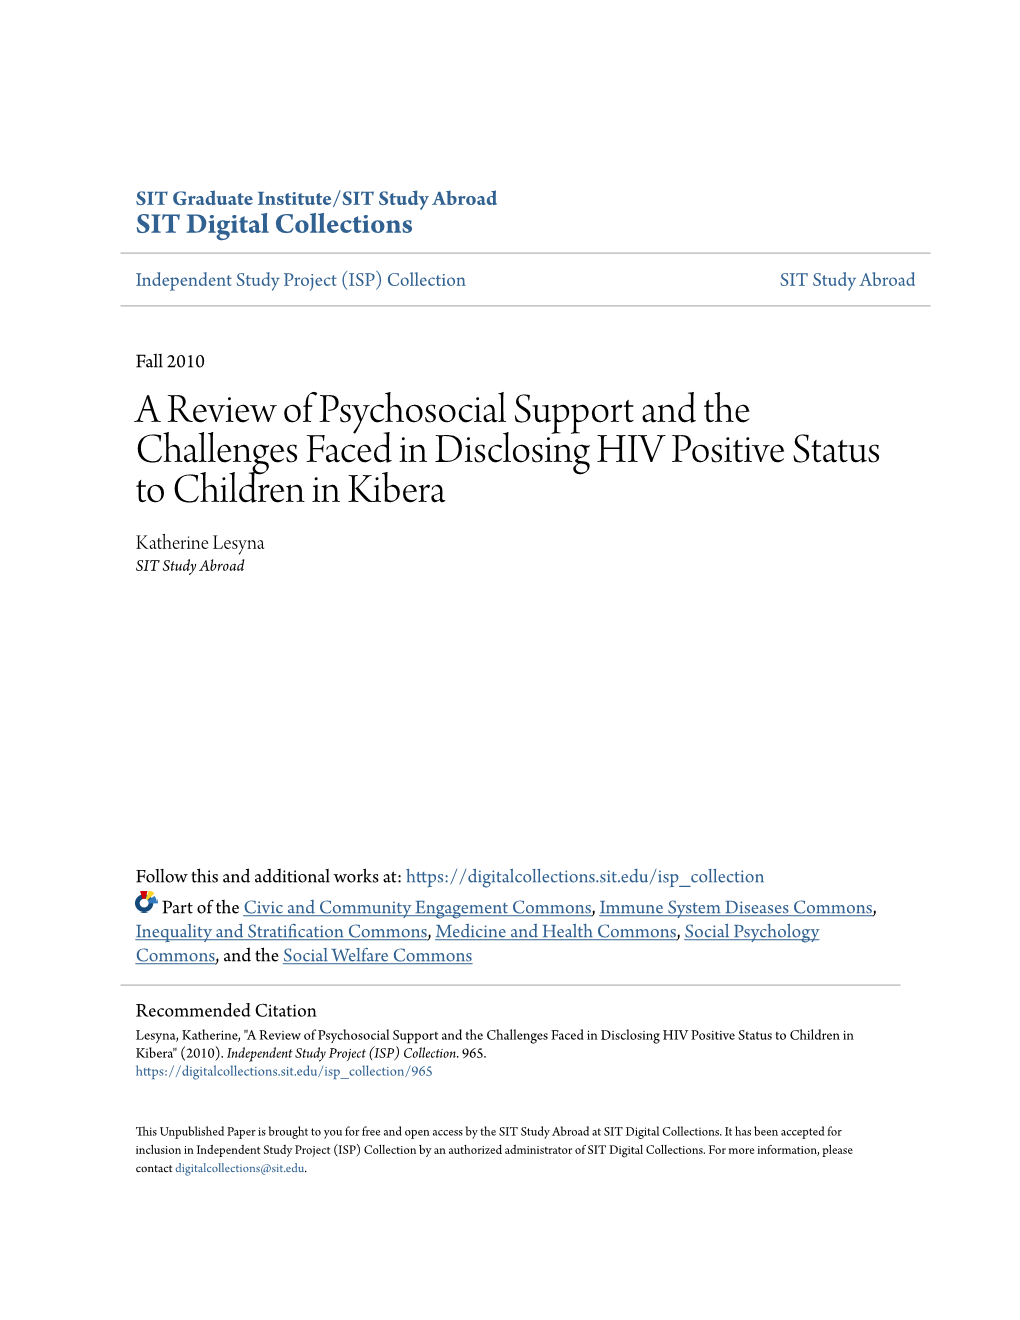 A Review of Psychosocial Support and the Challenges Faced in Disclosing HIV Positive Status to Children in Kibera Katherine Lesyna SIT Study Abroad